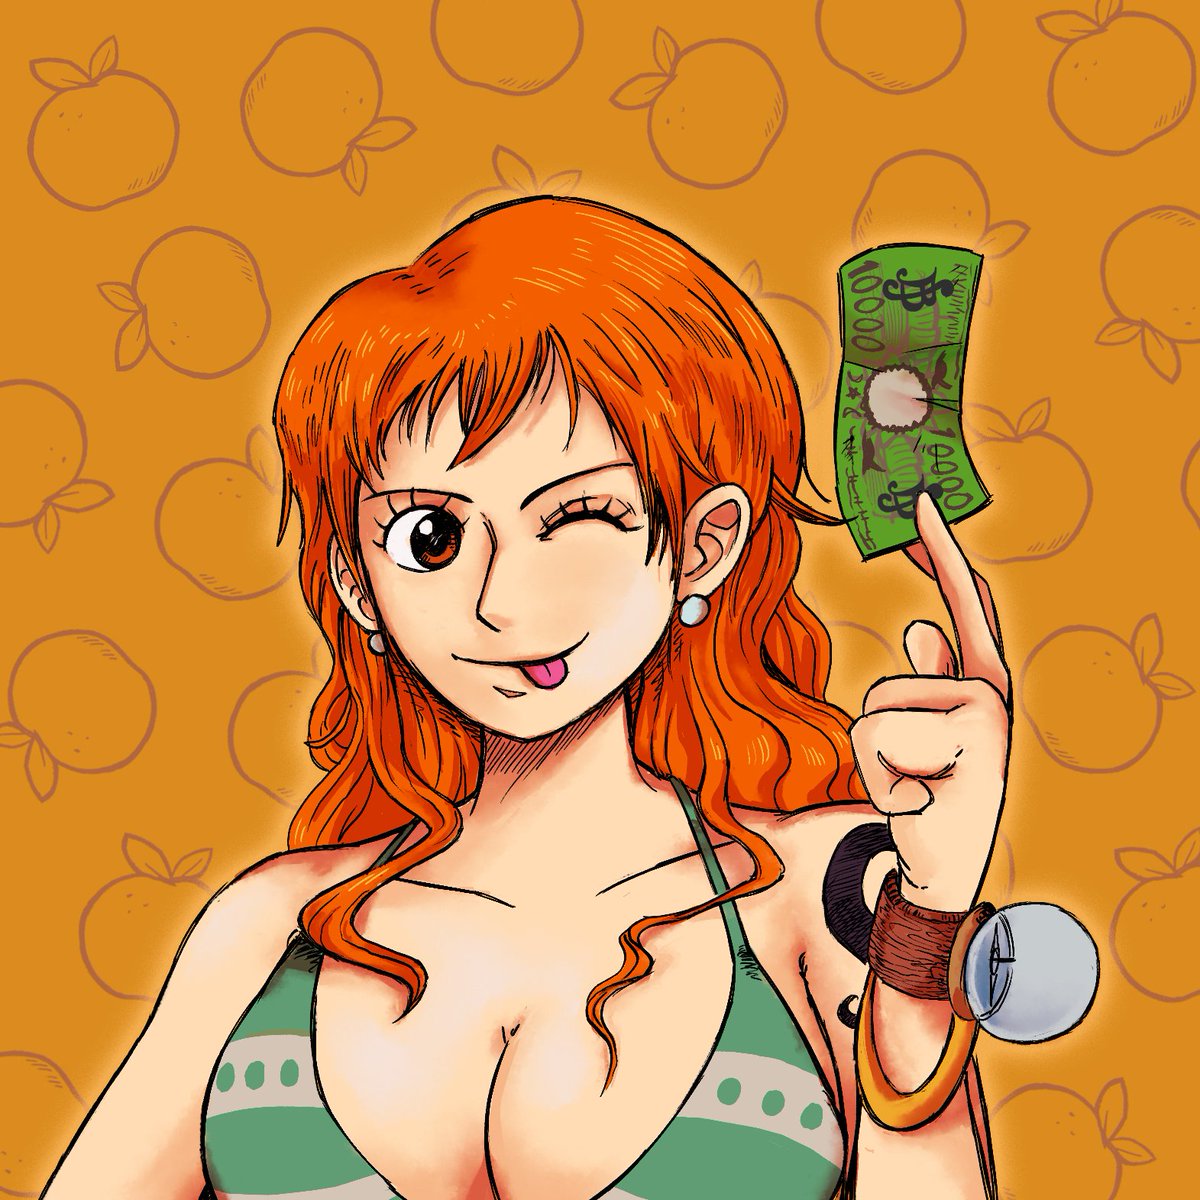 Strawhat Button Artworks (3/10): Nami 🍊🧭
Going from one character with shitty navigation skills to one with the best of the entire crew! 

#onepiece #nami #animeart #shonenjump #femalecharacter #cat #eiichirooda #nami #manga #fruit #sexyfemale #fanart #buttonart #onepiecemanga